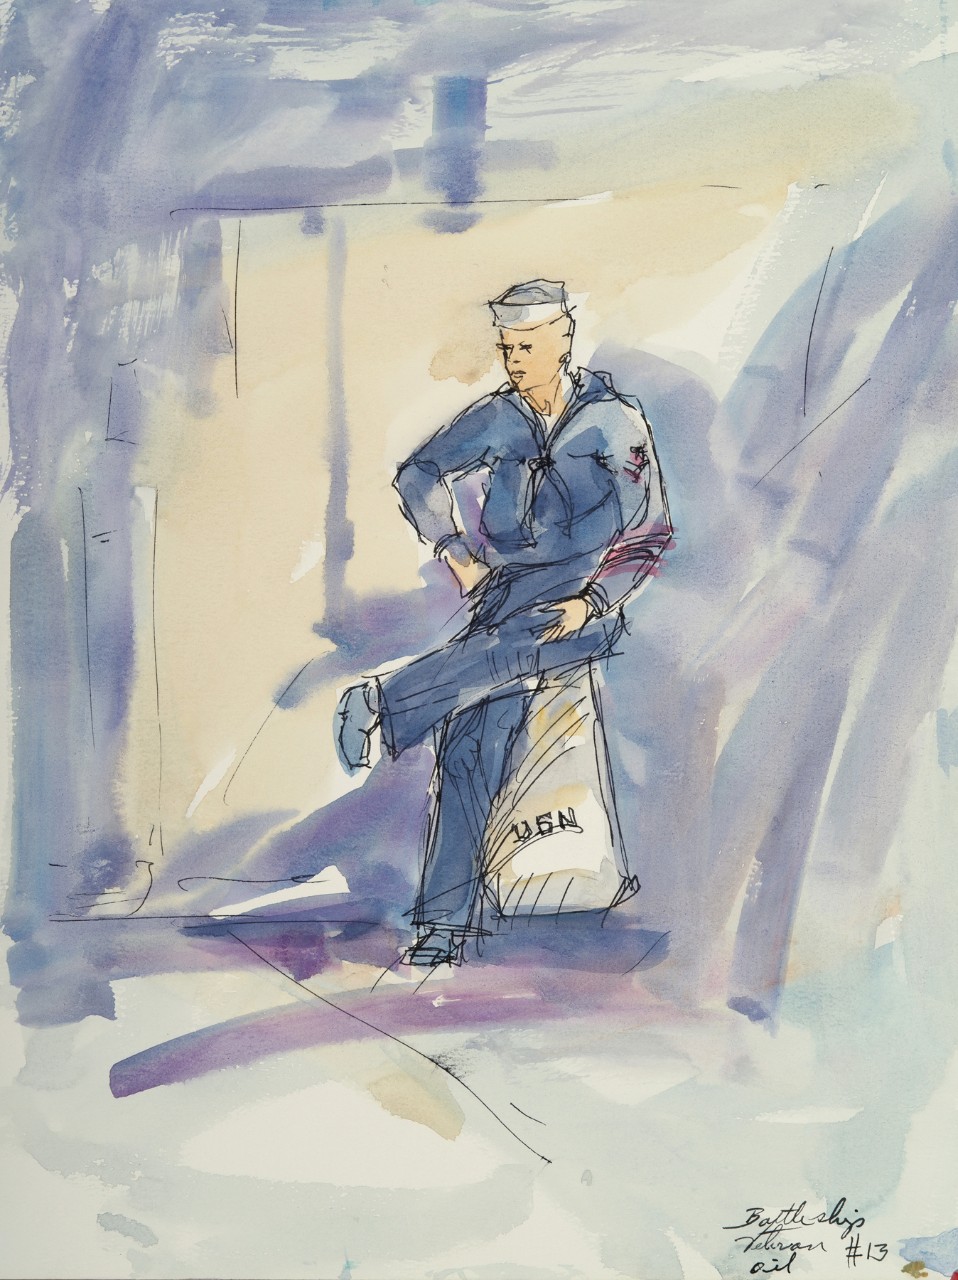 A sailor is seated on a full canvas bag he is leaning against the side of the ship